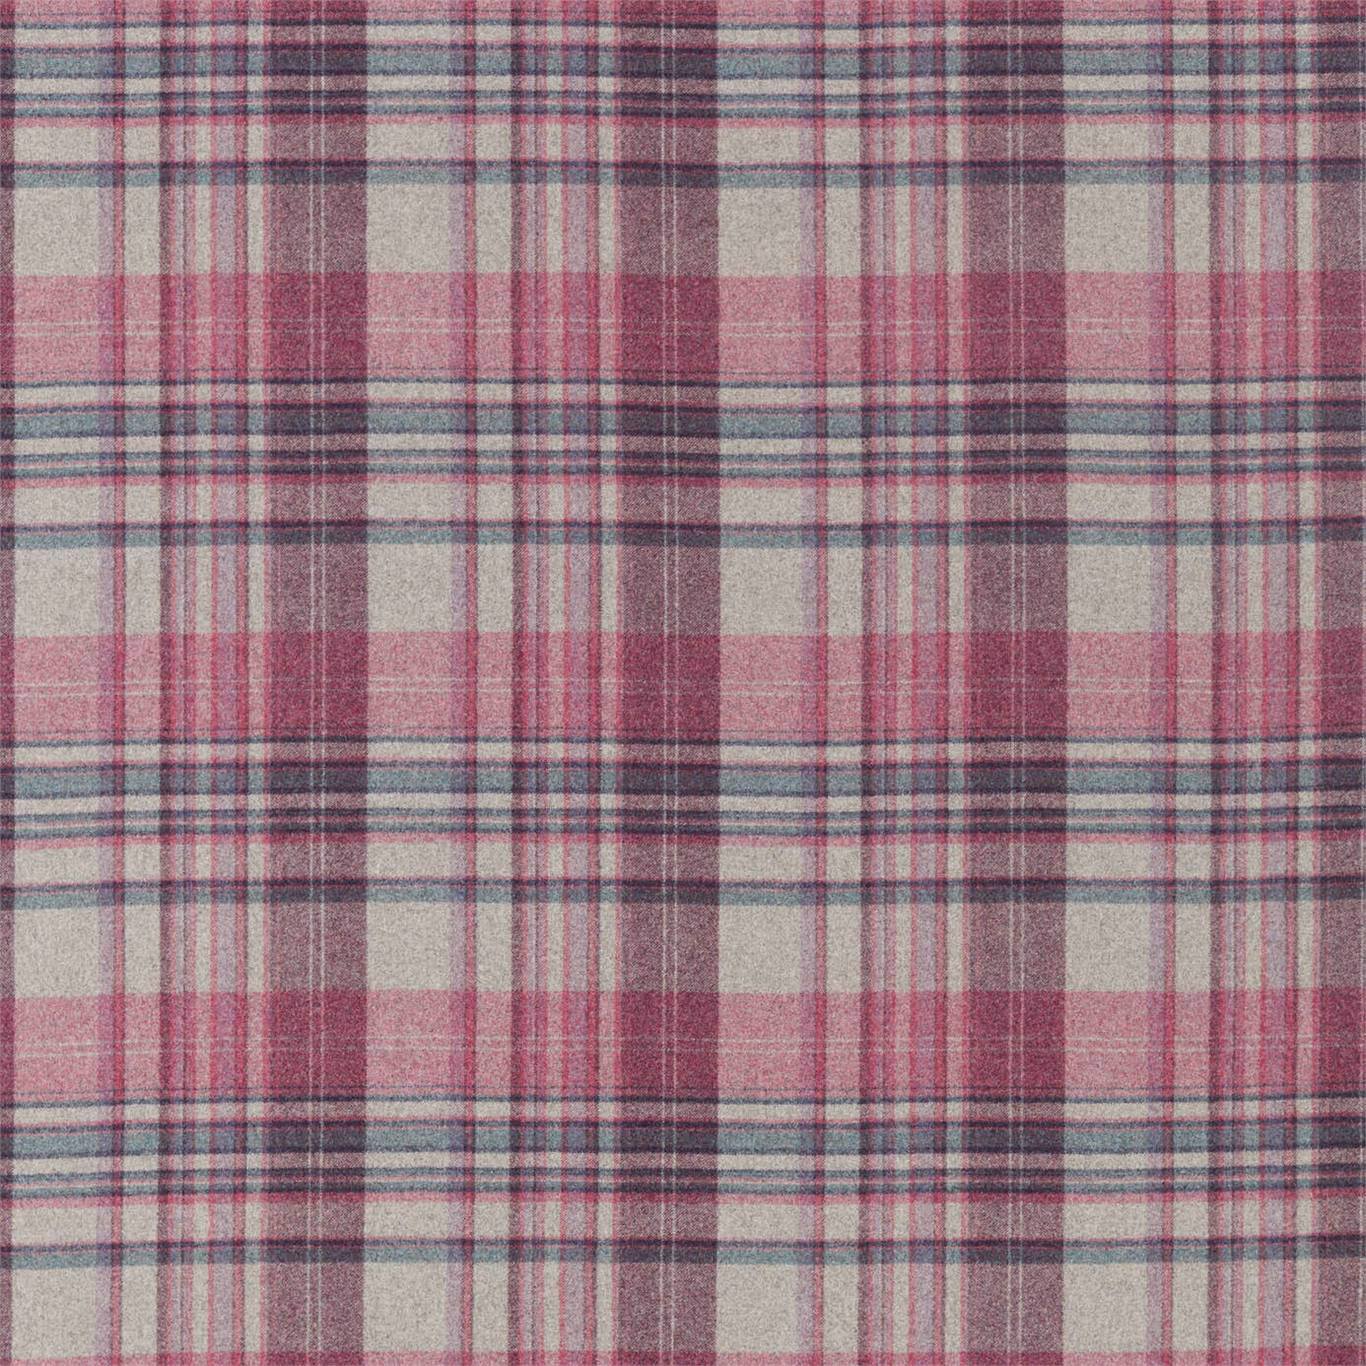 Bryndle Check Fabric by Sanderson - DISW236736 - Mulberry/Fig